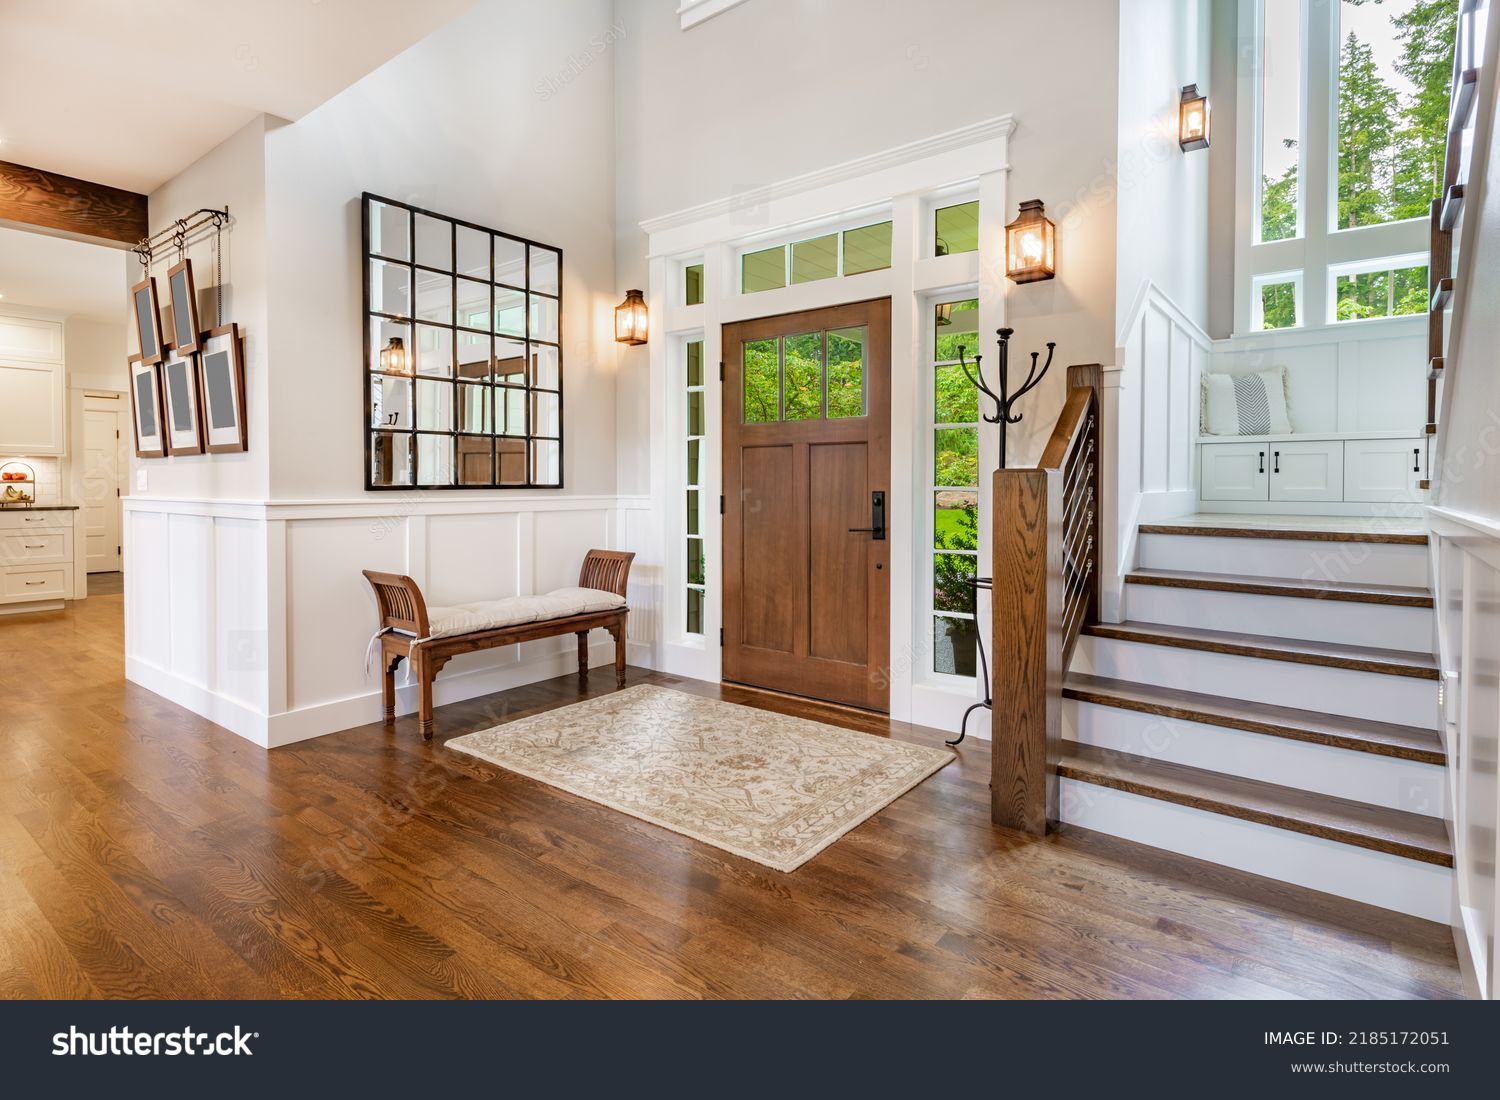 front entry foyer of a luxurious home rich wood tones staircase bench with a welcoming feel #2185172051